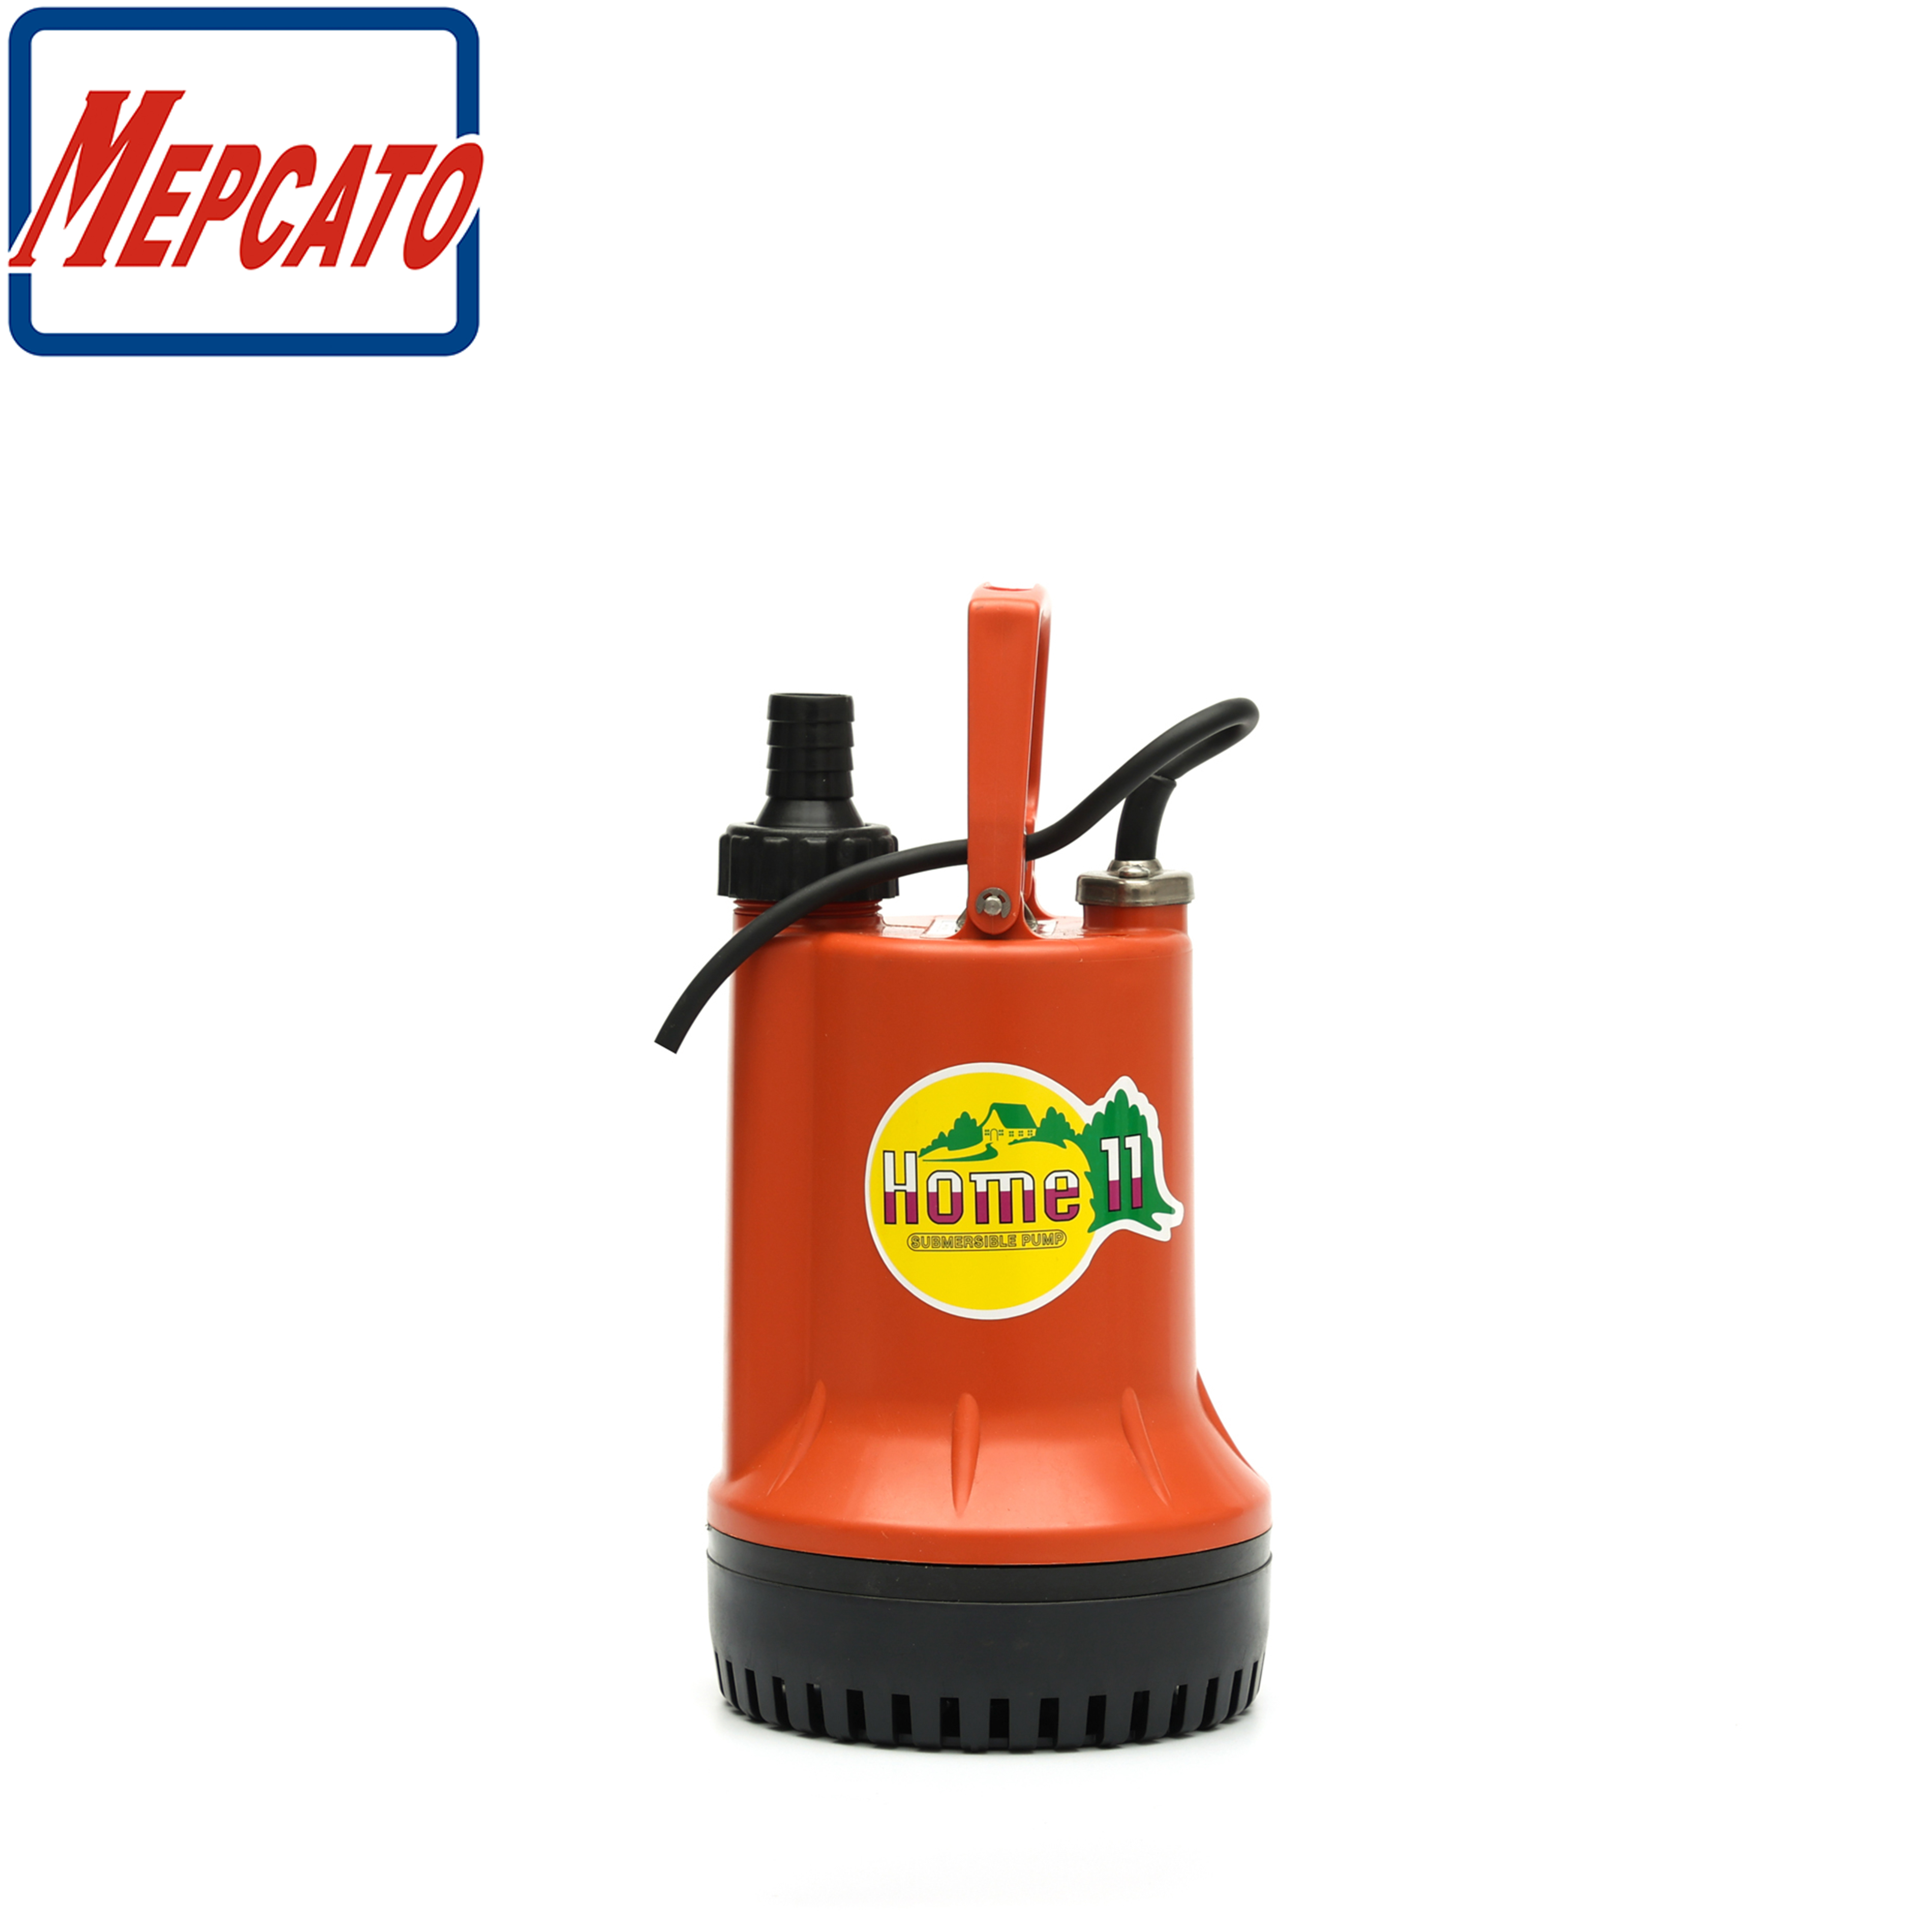 120W Plastic Submersible Water Drainage Pump with Float Switch